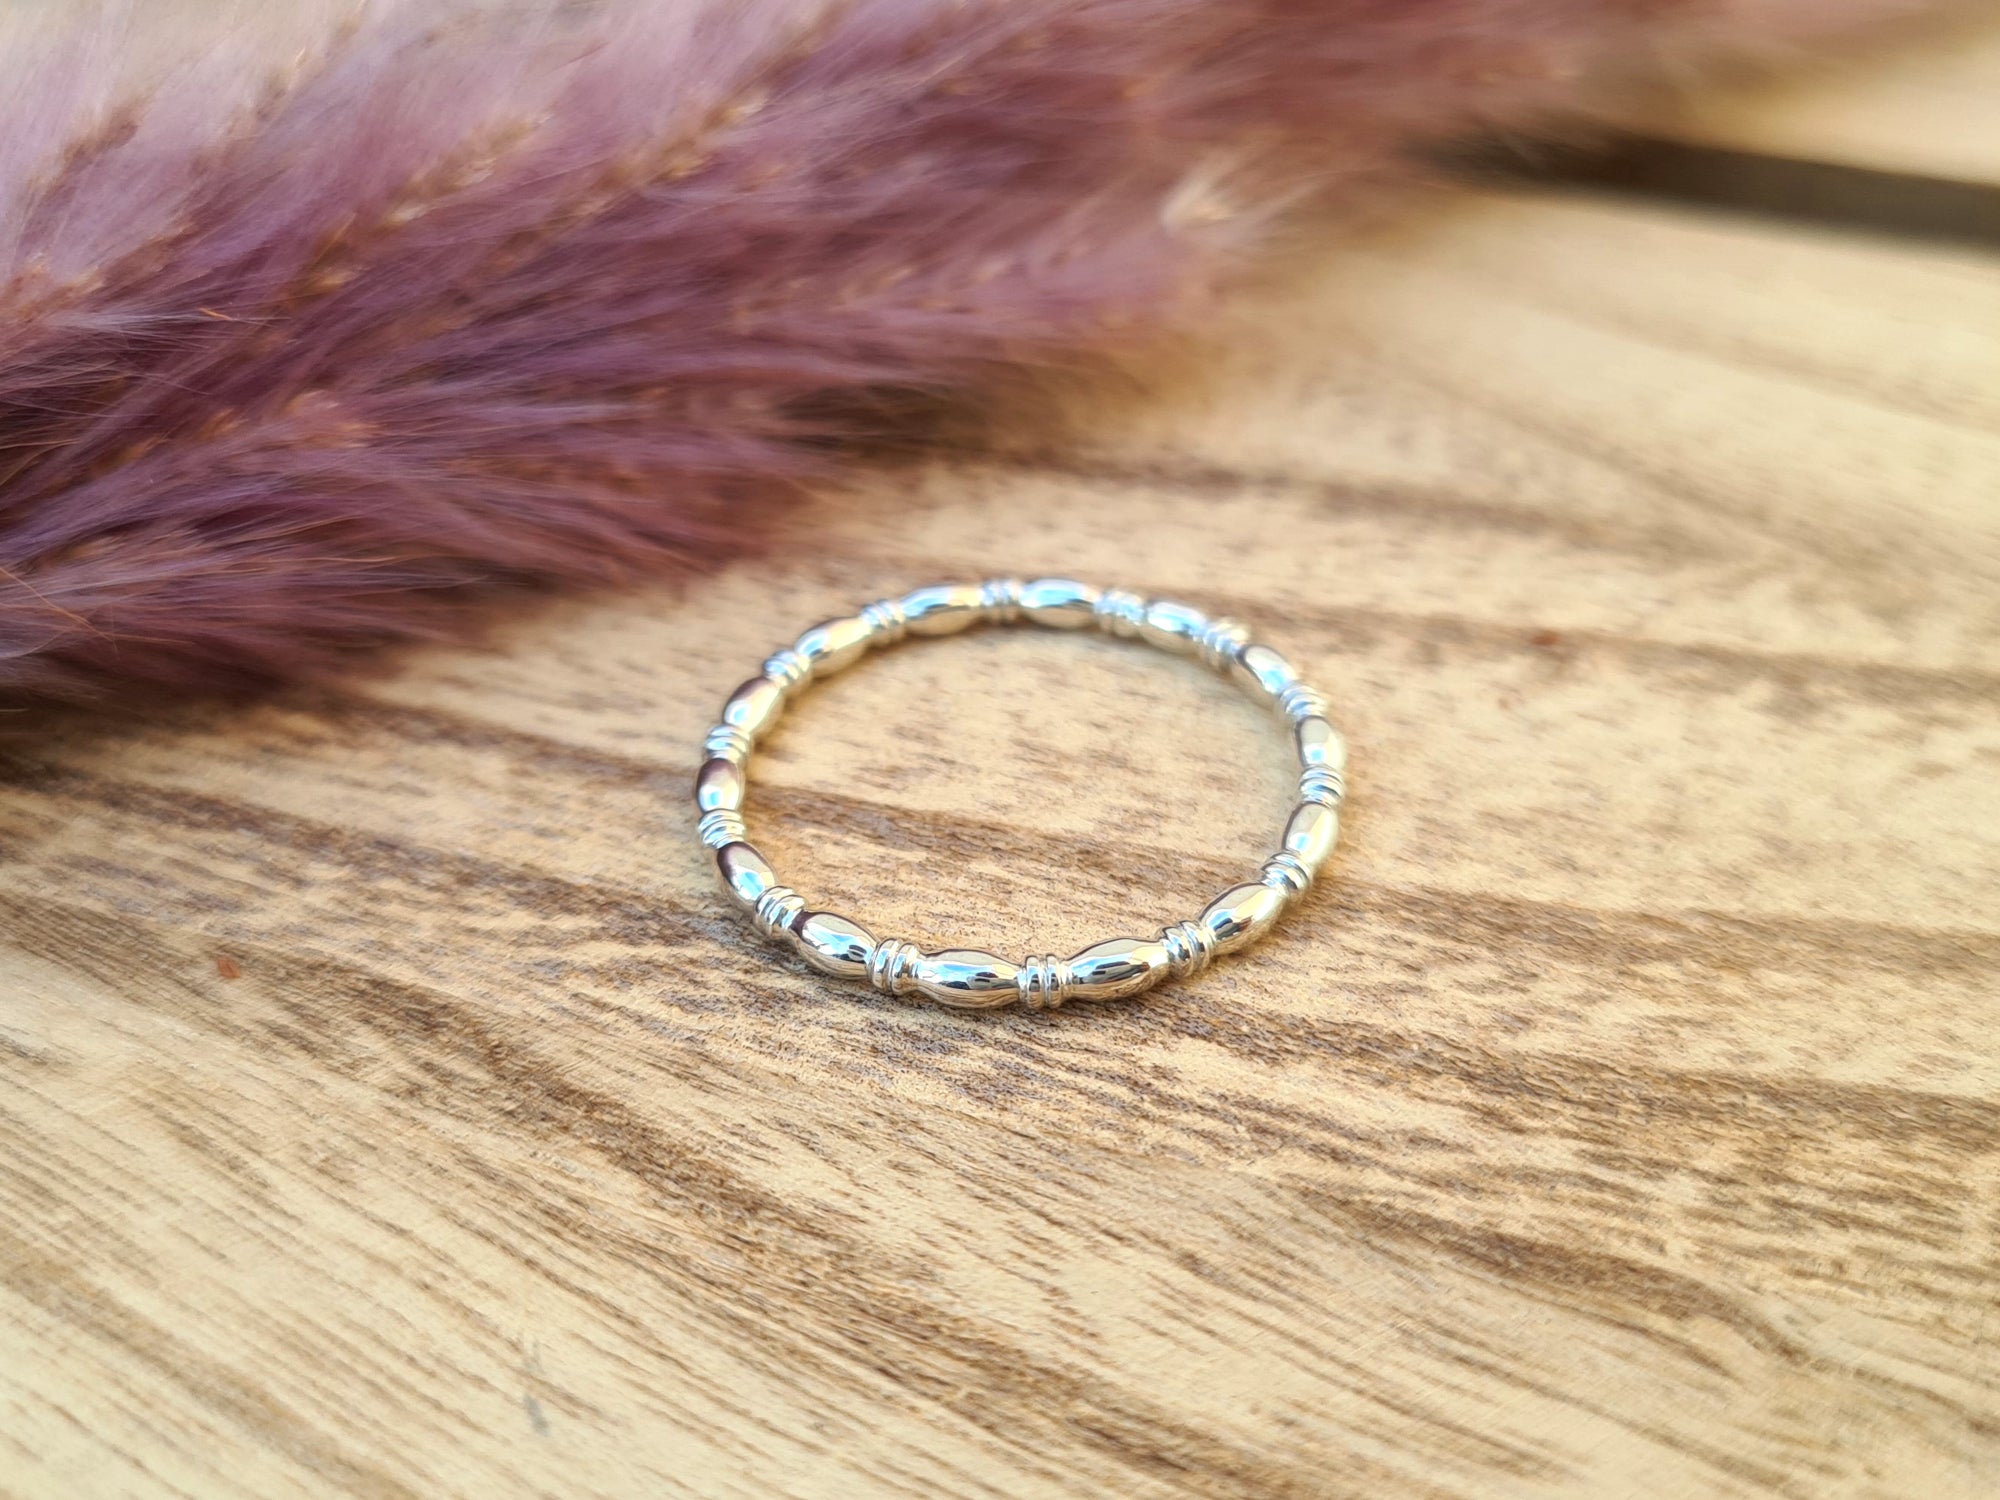 Oval Bobble Ring